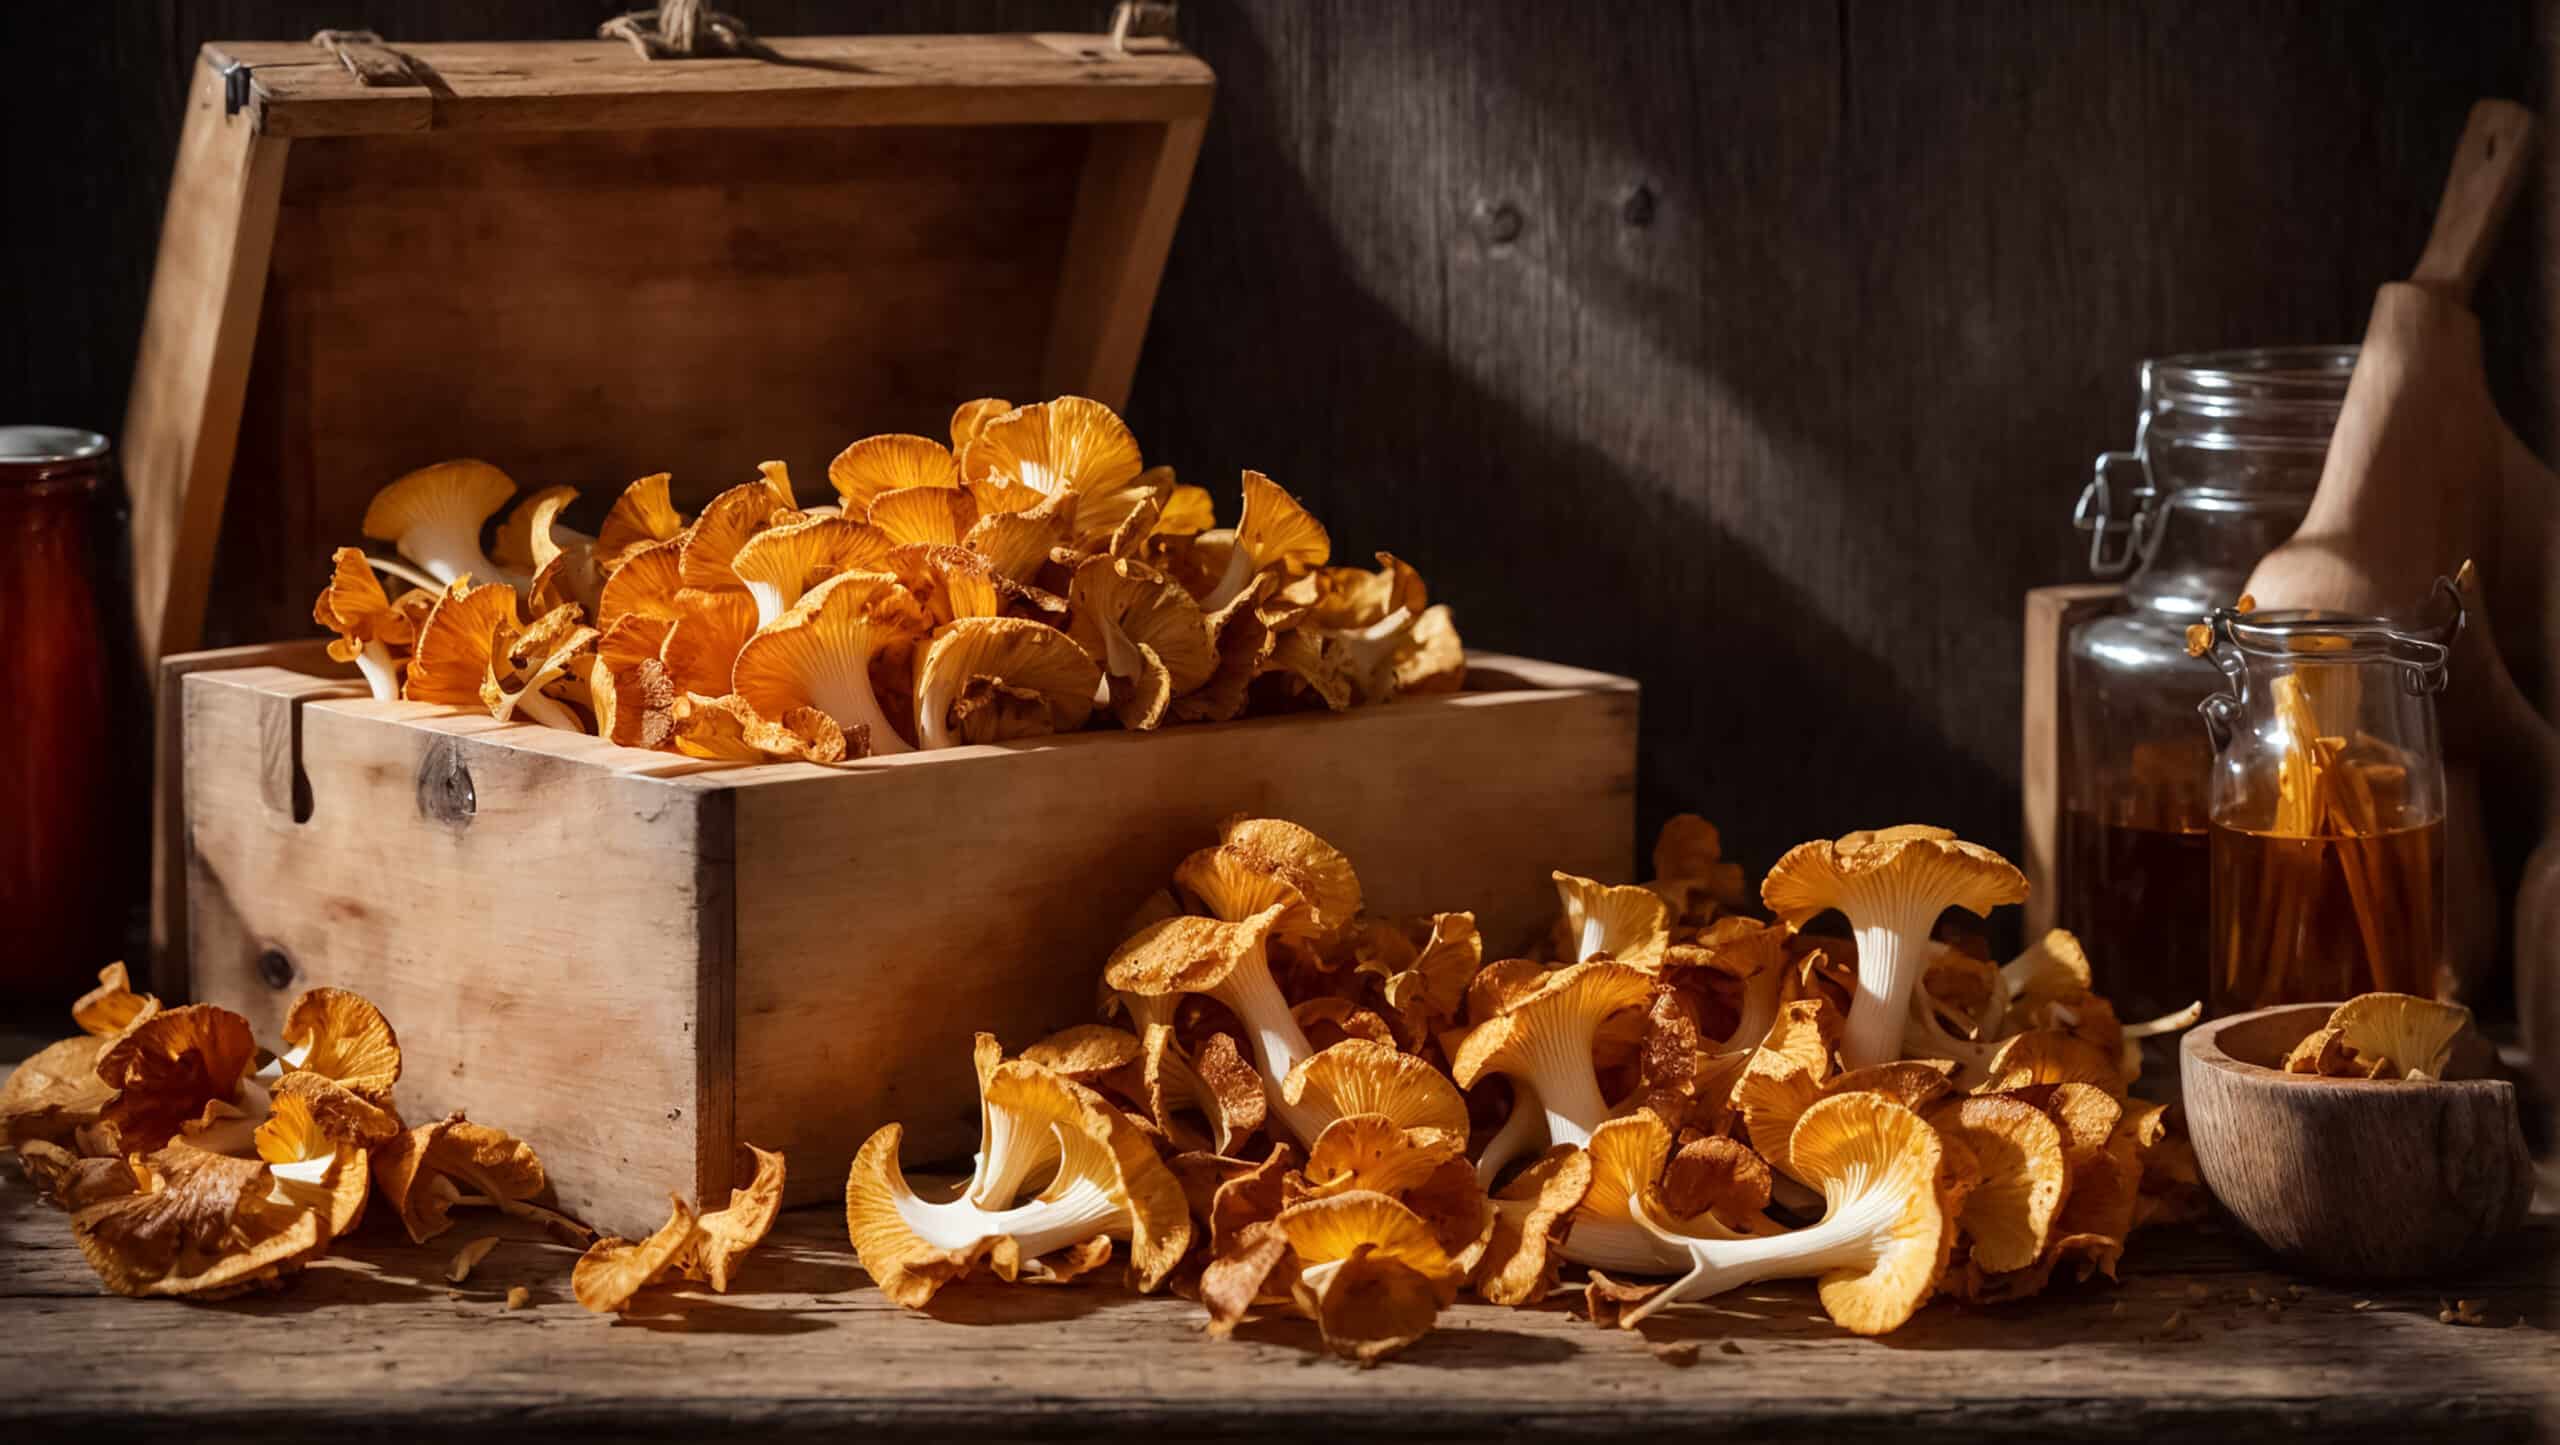 growmyownhealthfood.com : What is a fun fact about chicken of the woods?